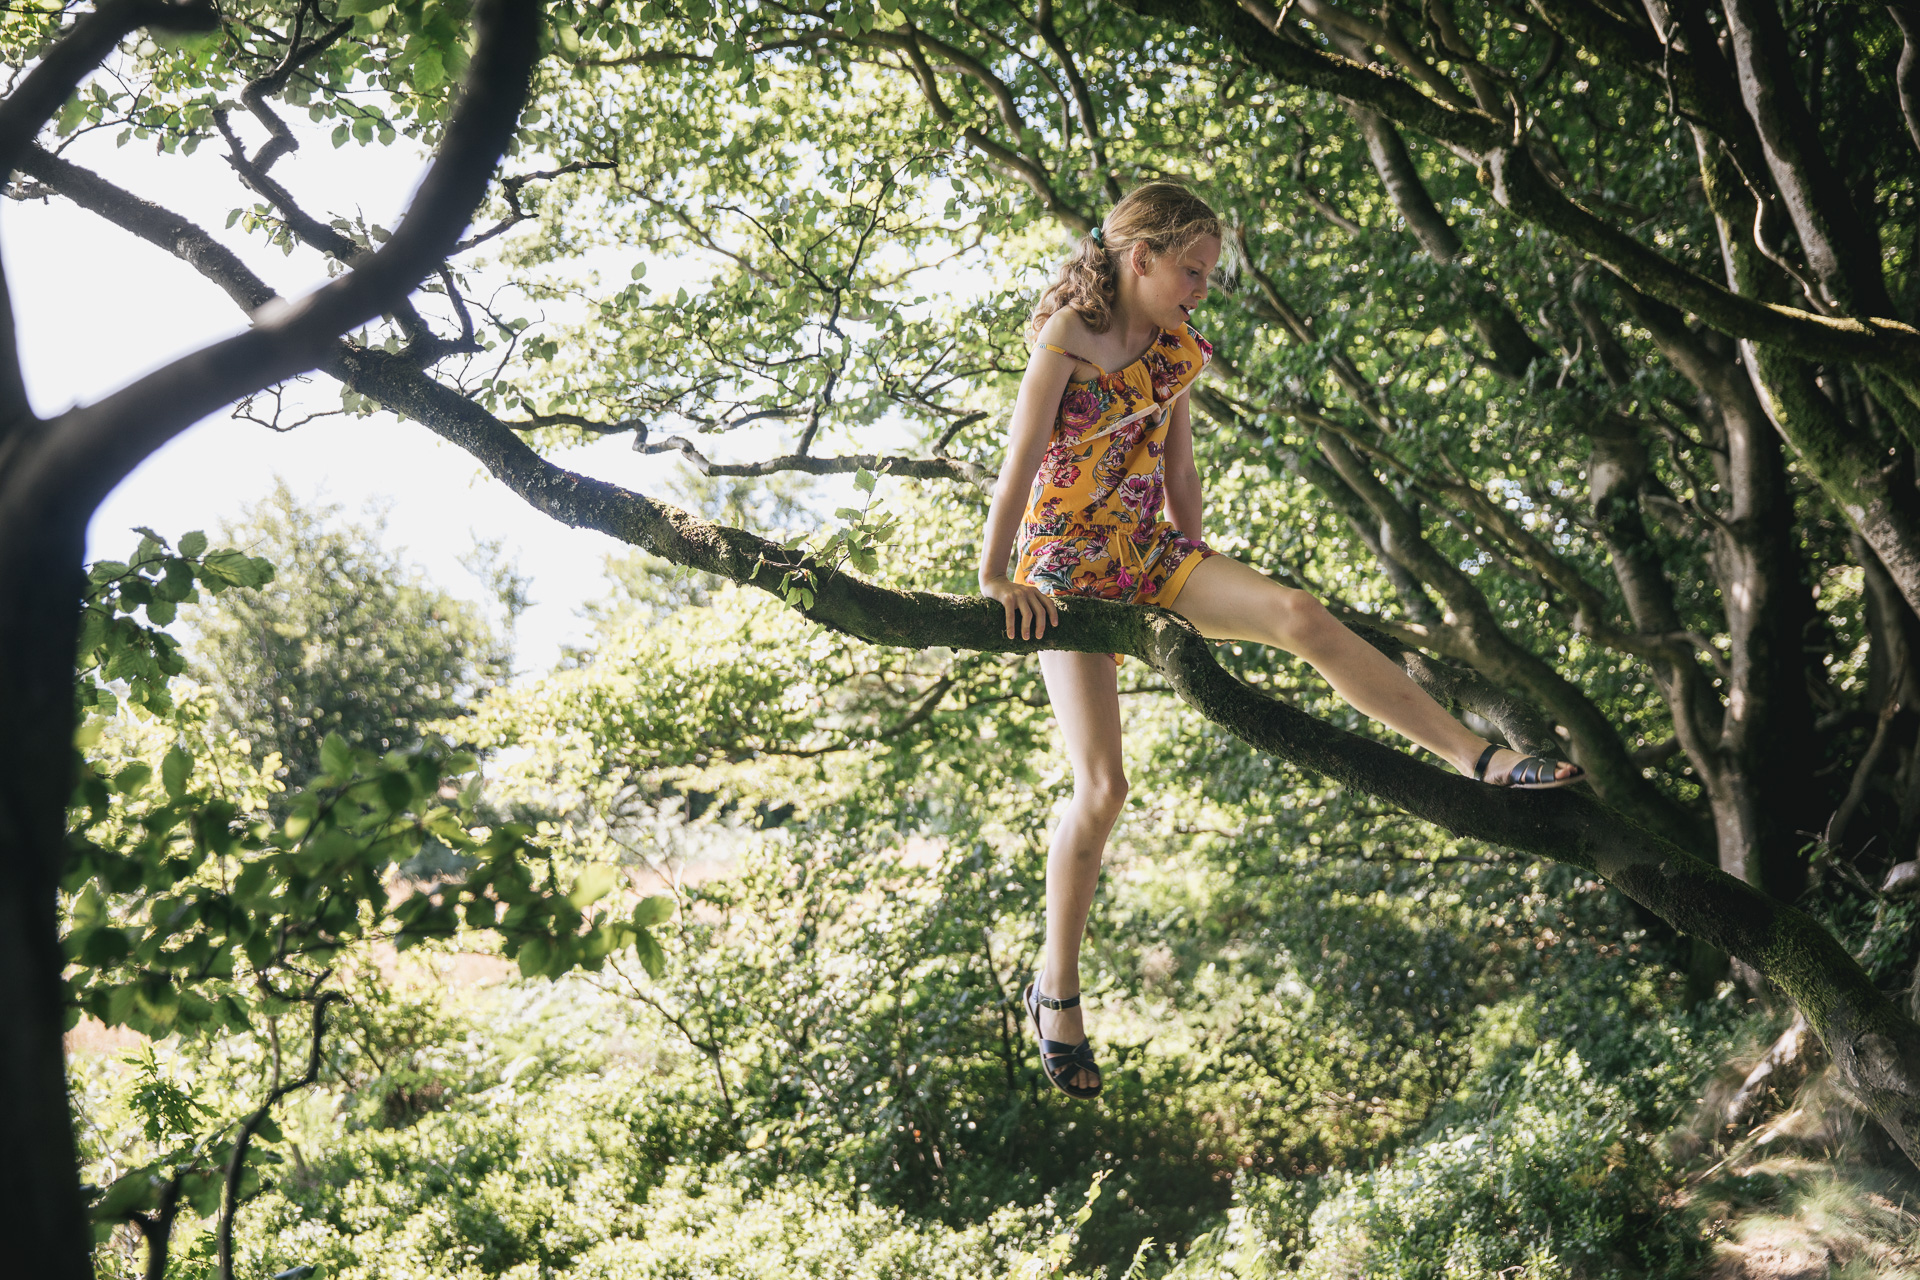 A young girl climbing on a tree